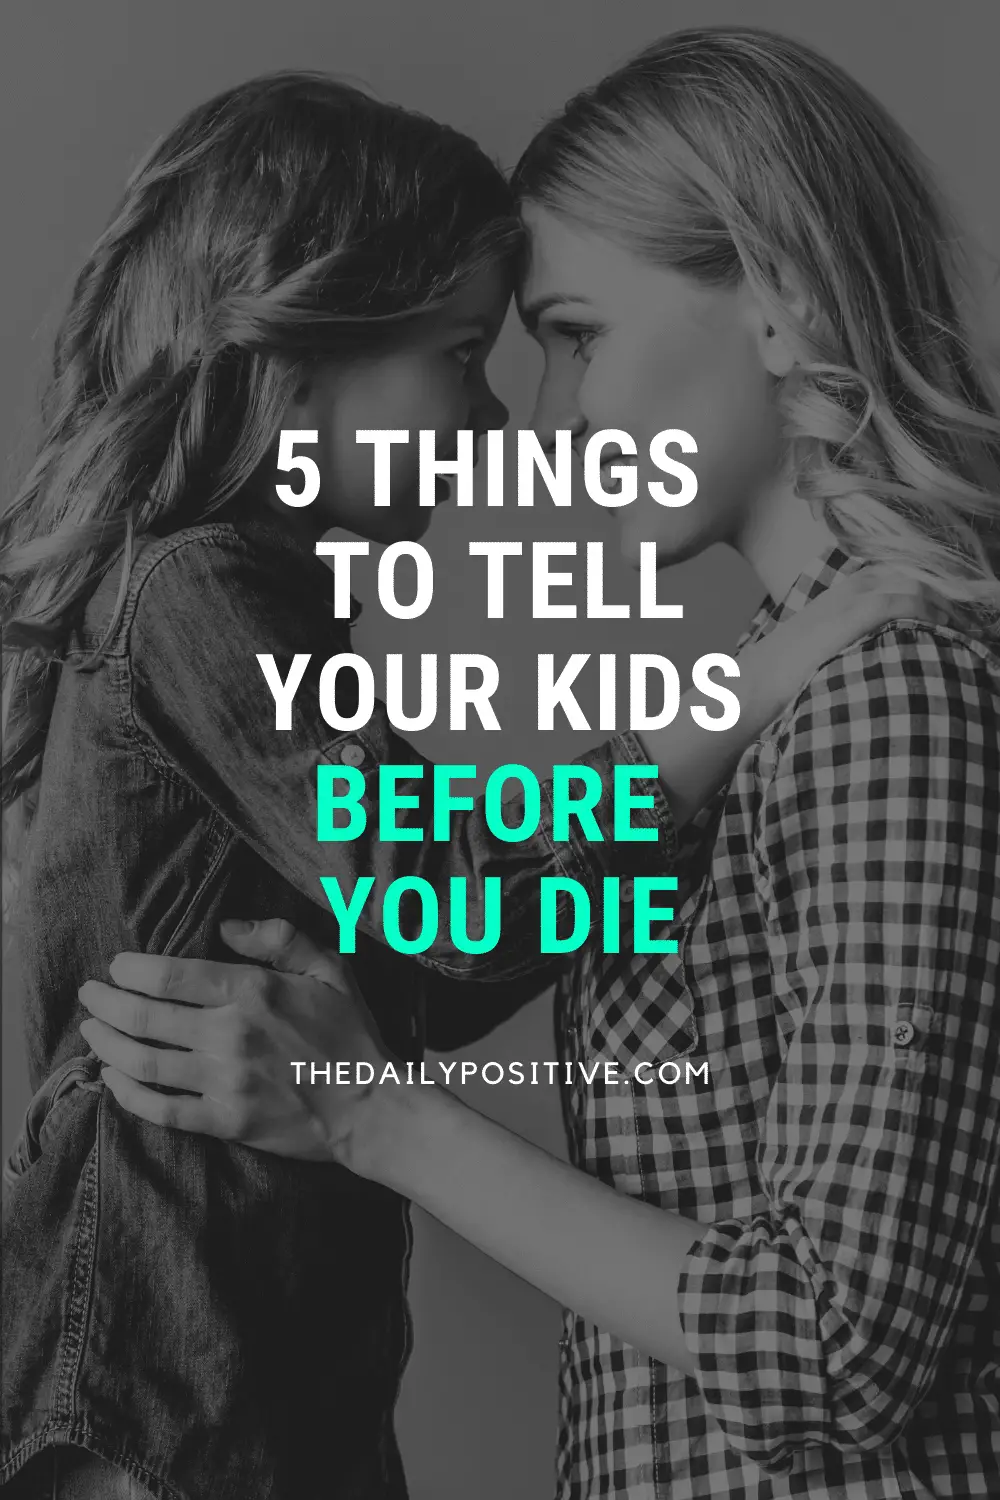 5 Things to Tell Your Kids Before You Die